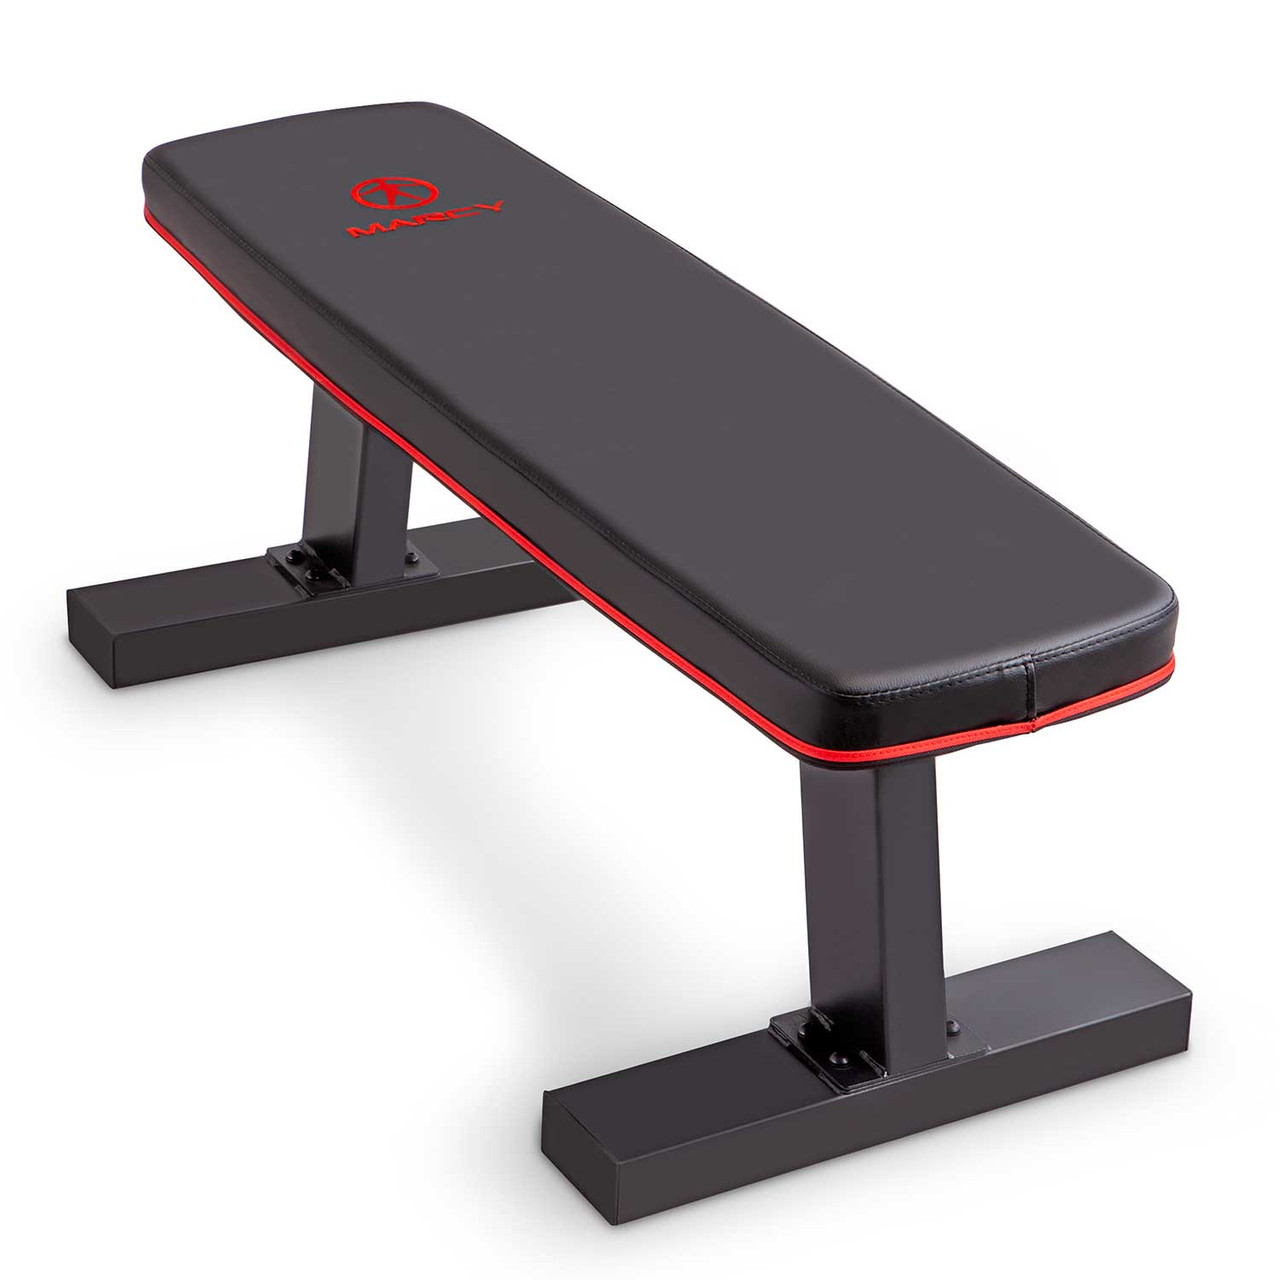 https://cdn11.bigcommerce.com/s-r2fl439k1s/images/stencil/1280x1280/products/350/2632/The_SB-10510_Flat_Bench_by_Marcy__77736.1677716073.jpg?c=2